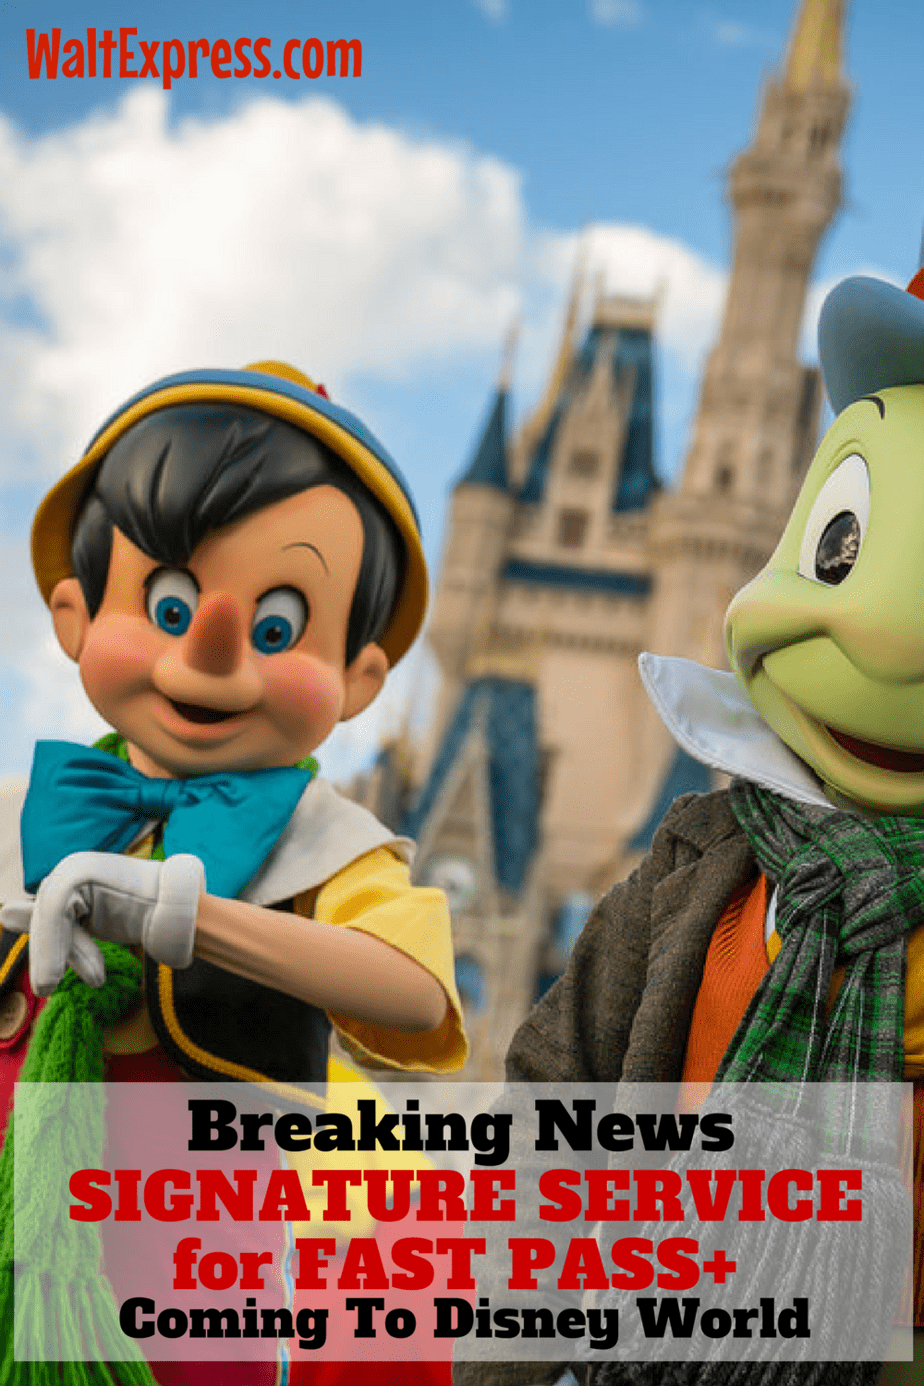 Breaking News: Disney World Announces Signature Service For Fast Pass+